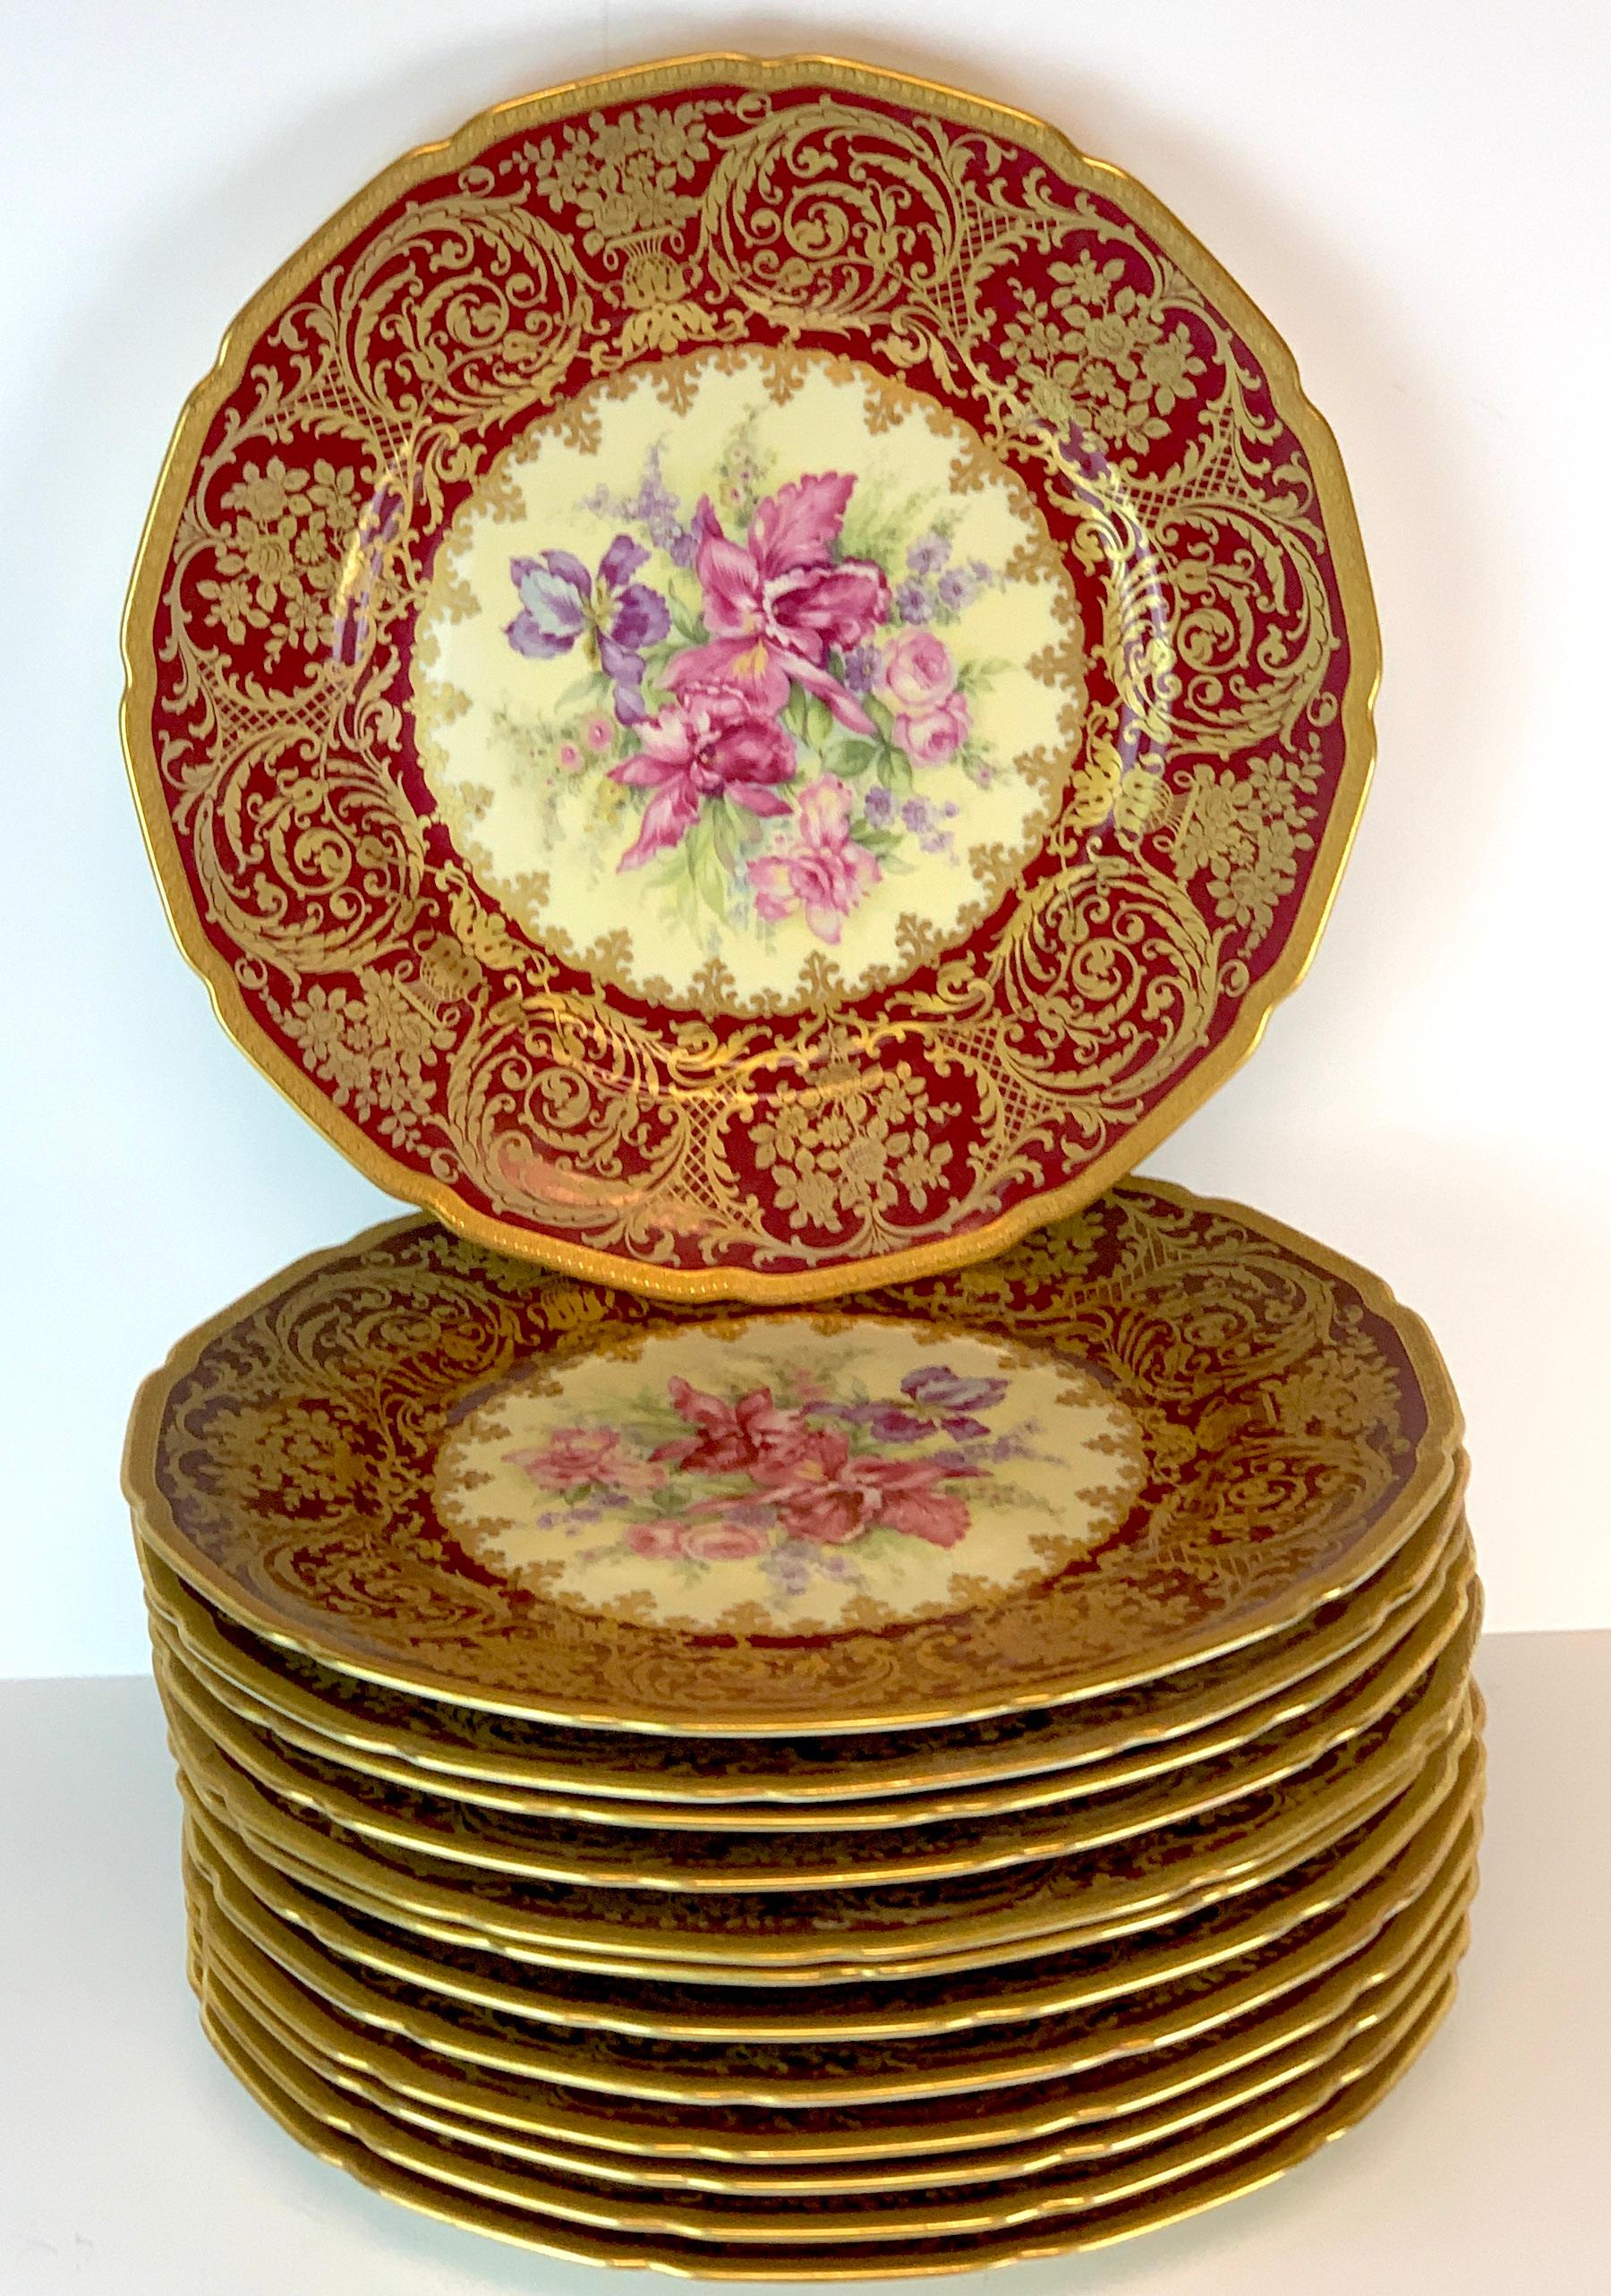 13 exquisite Rosenthal garnet gilt orchid and floral service plates, special order, each one richly decorated with wide red and gold borders, with vibrant floral centers, all decorated the same. Each one numbered
#6129/73.